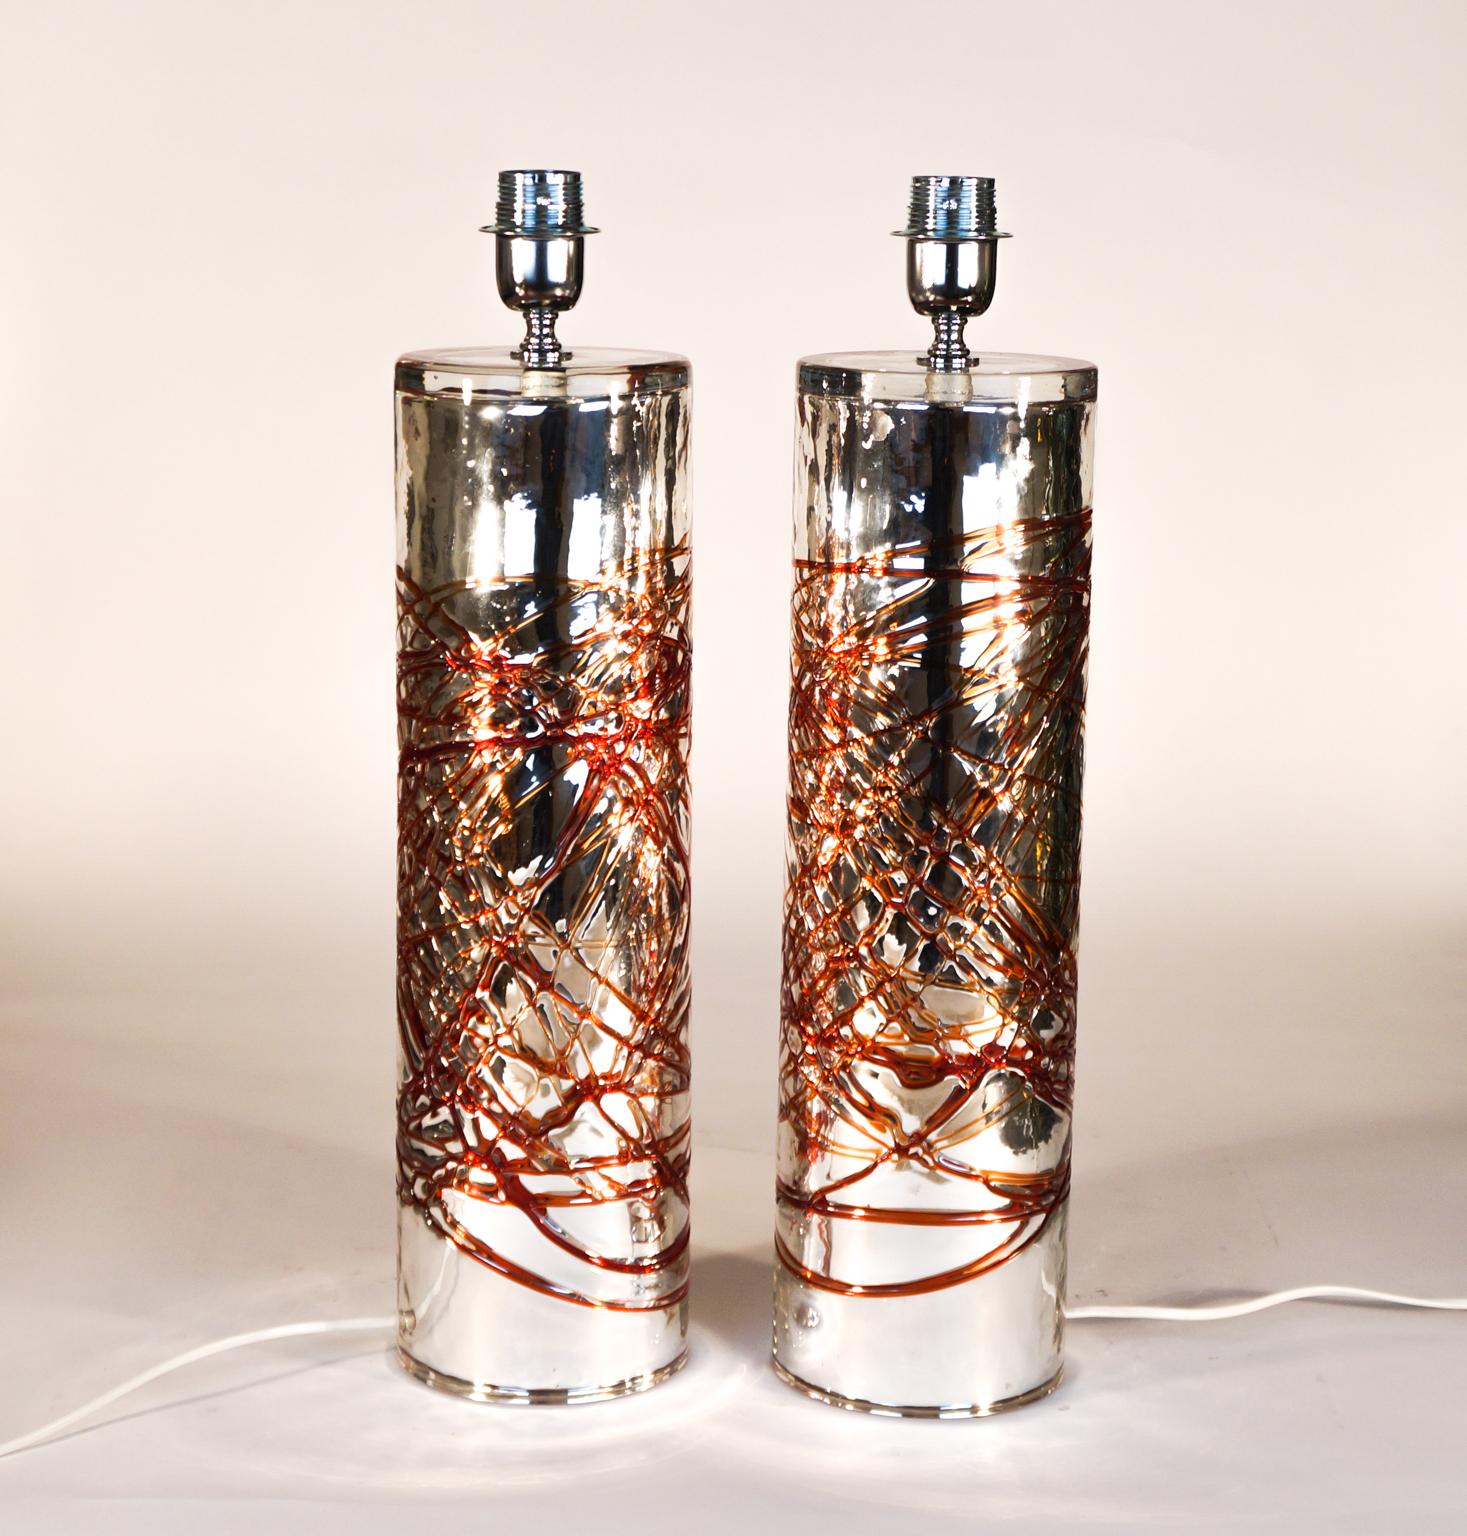 Pair of Murano blown glass table lamps, handmade by the famous glass master Alberto Donà.
The two lamps have a cylinder shape with a mirror finish and details in red glass wires
Project of the Murano glass master Alberto Donà in 1990s.
The price